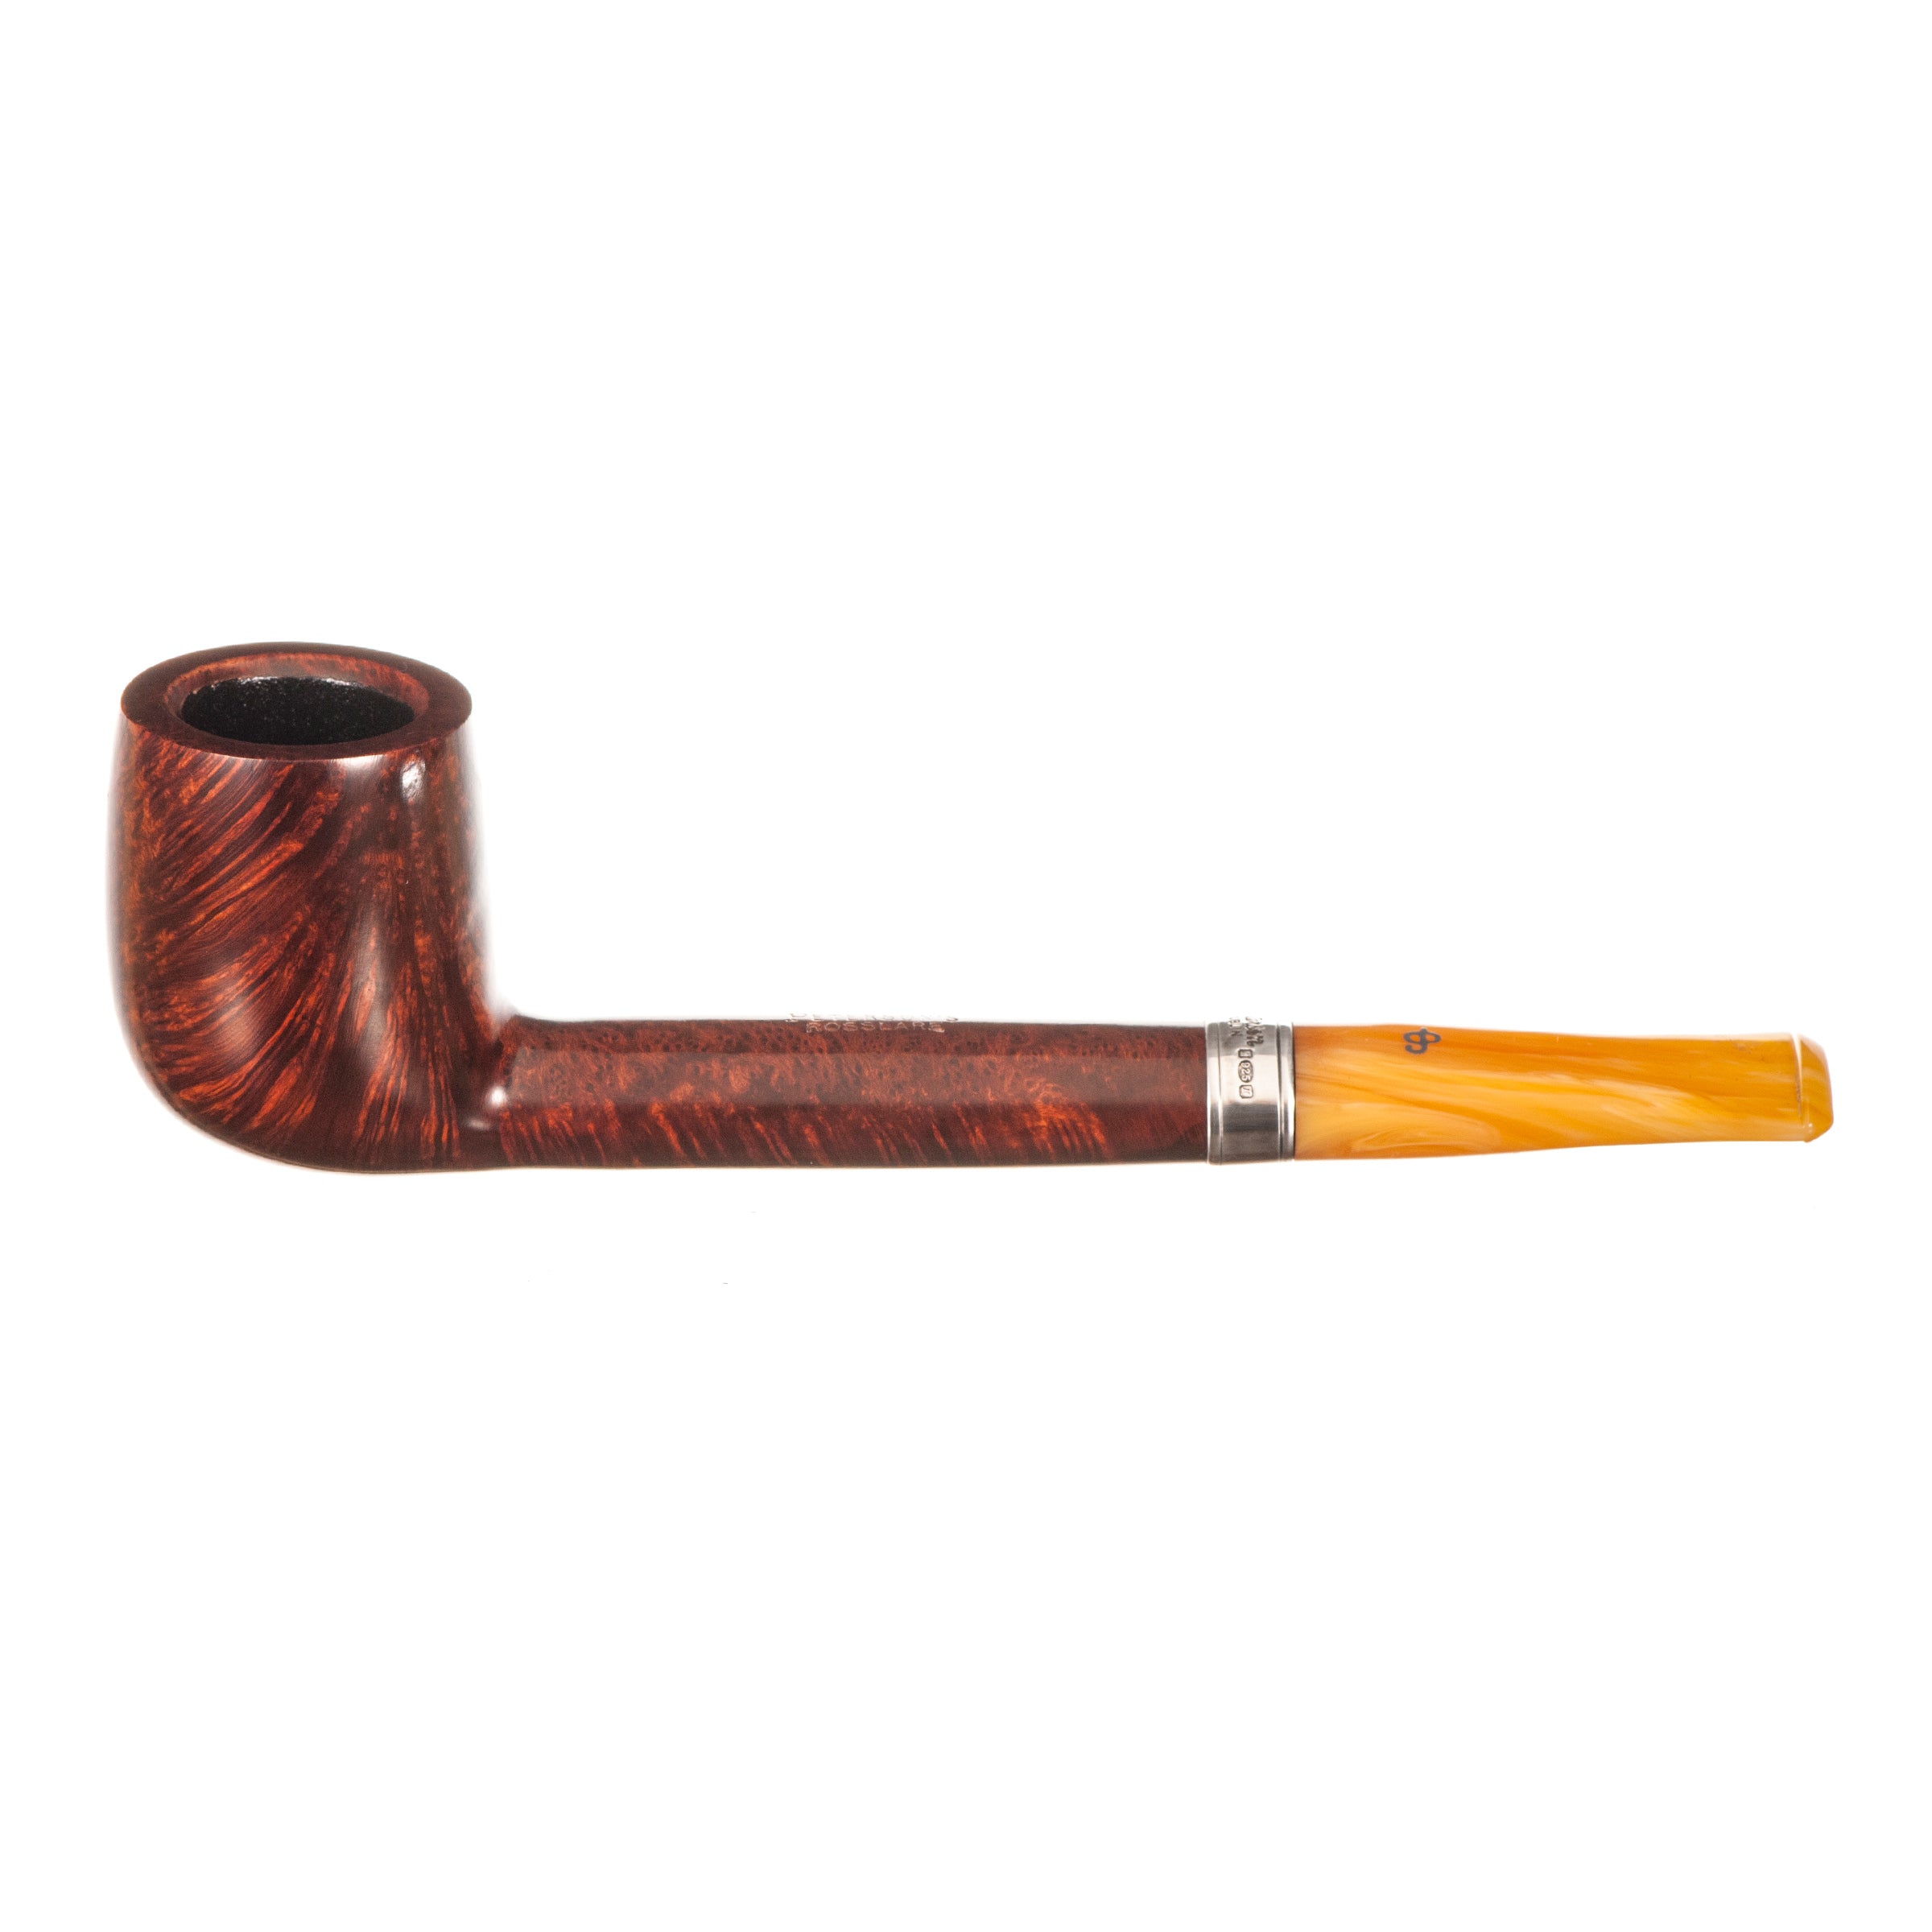 Peterson Rosslare Classic Smooth 264 Pipe